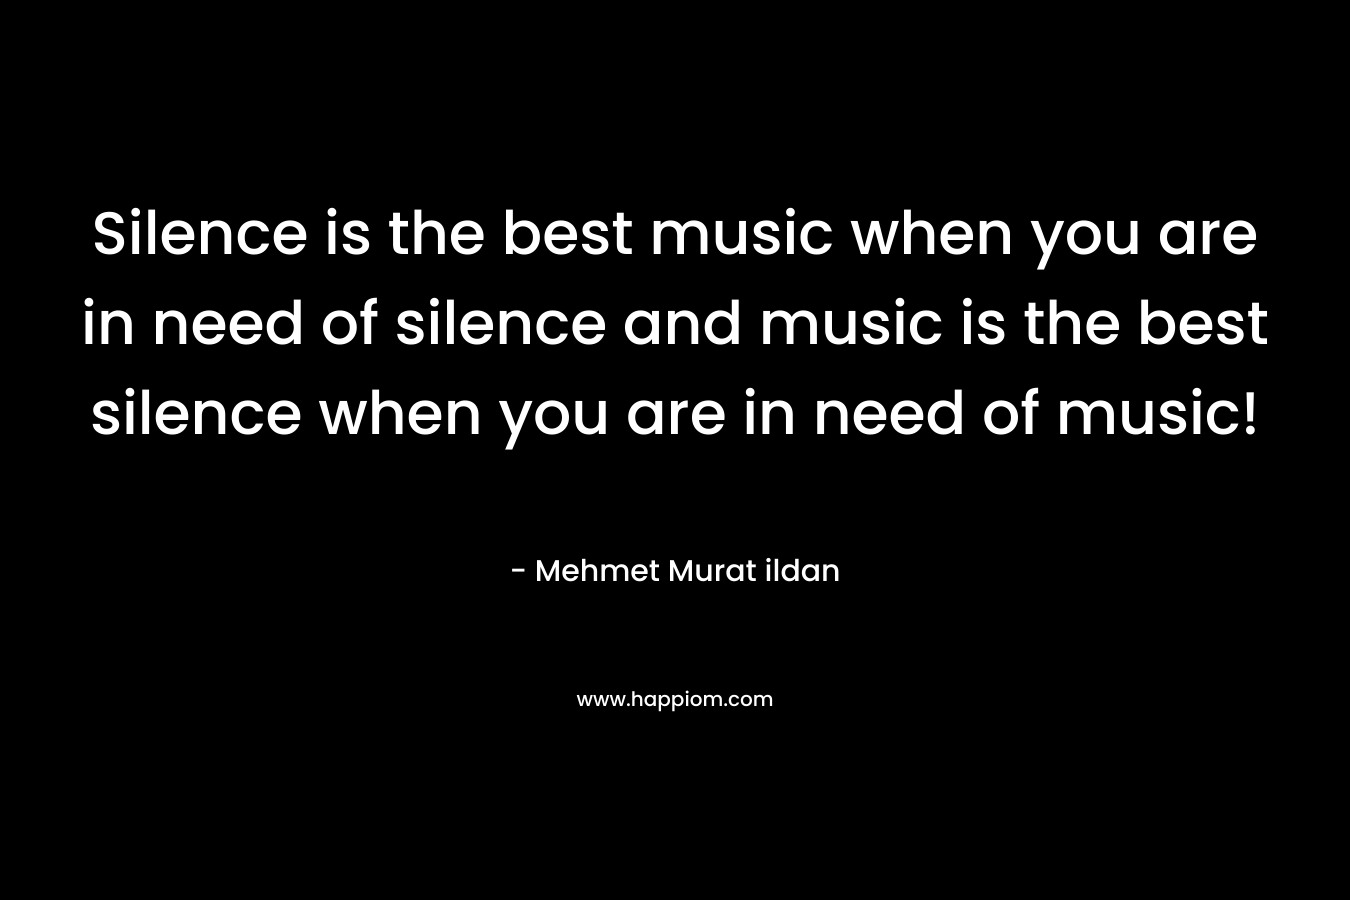 Silence is the best music when you are in need of silence and music is the best silence when you are in need of music!